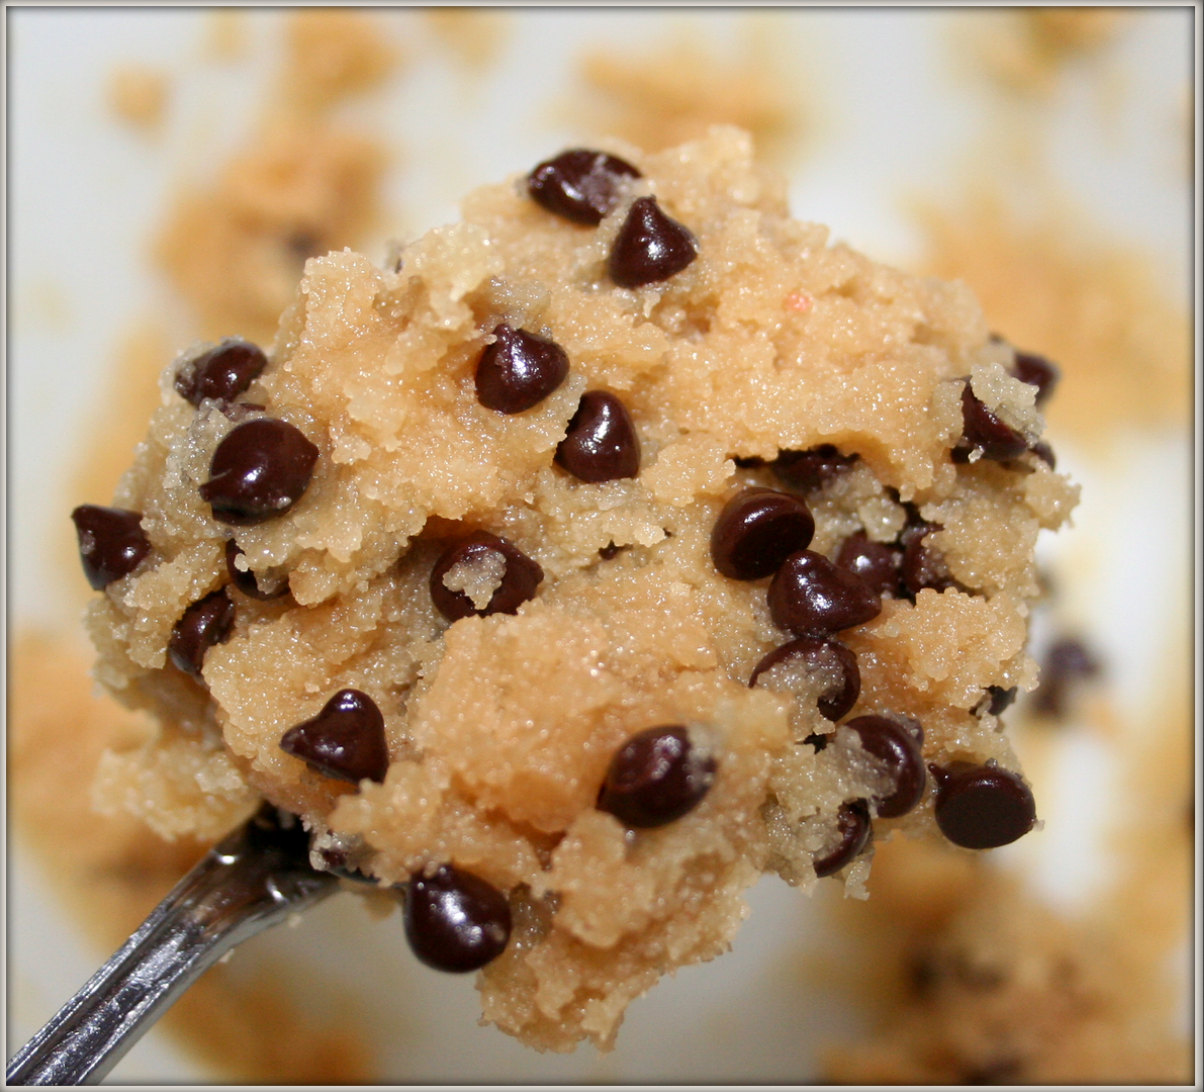 Close-up of a scrumptious gob of chocolate chip cookie dough on a silver spoon.